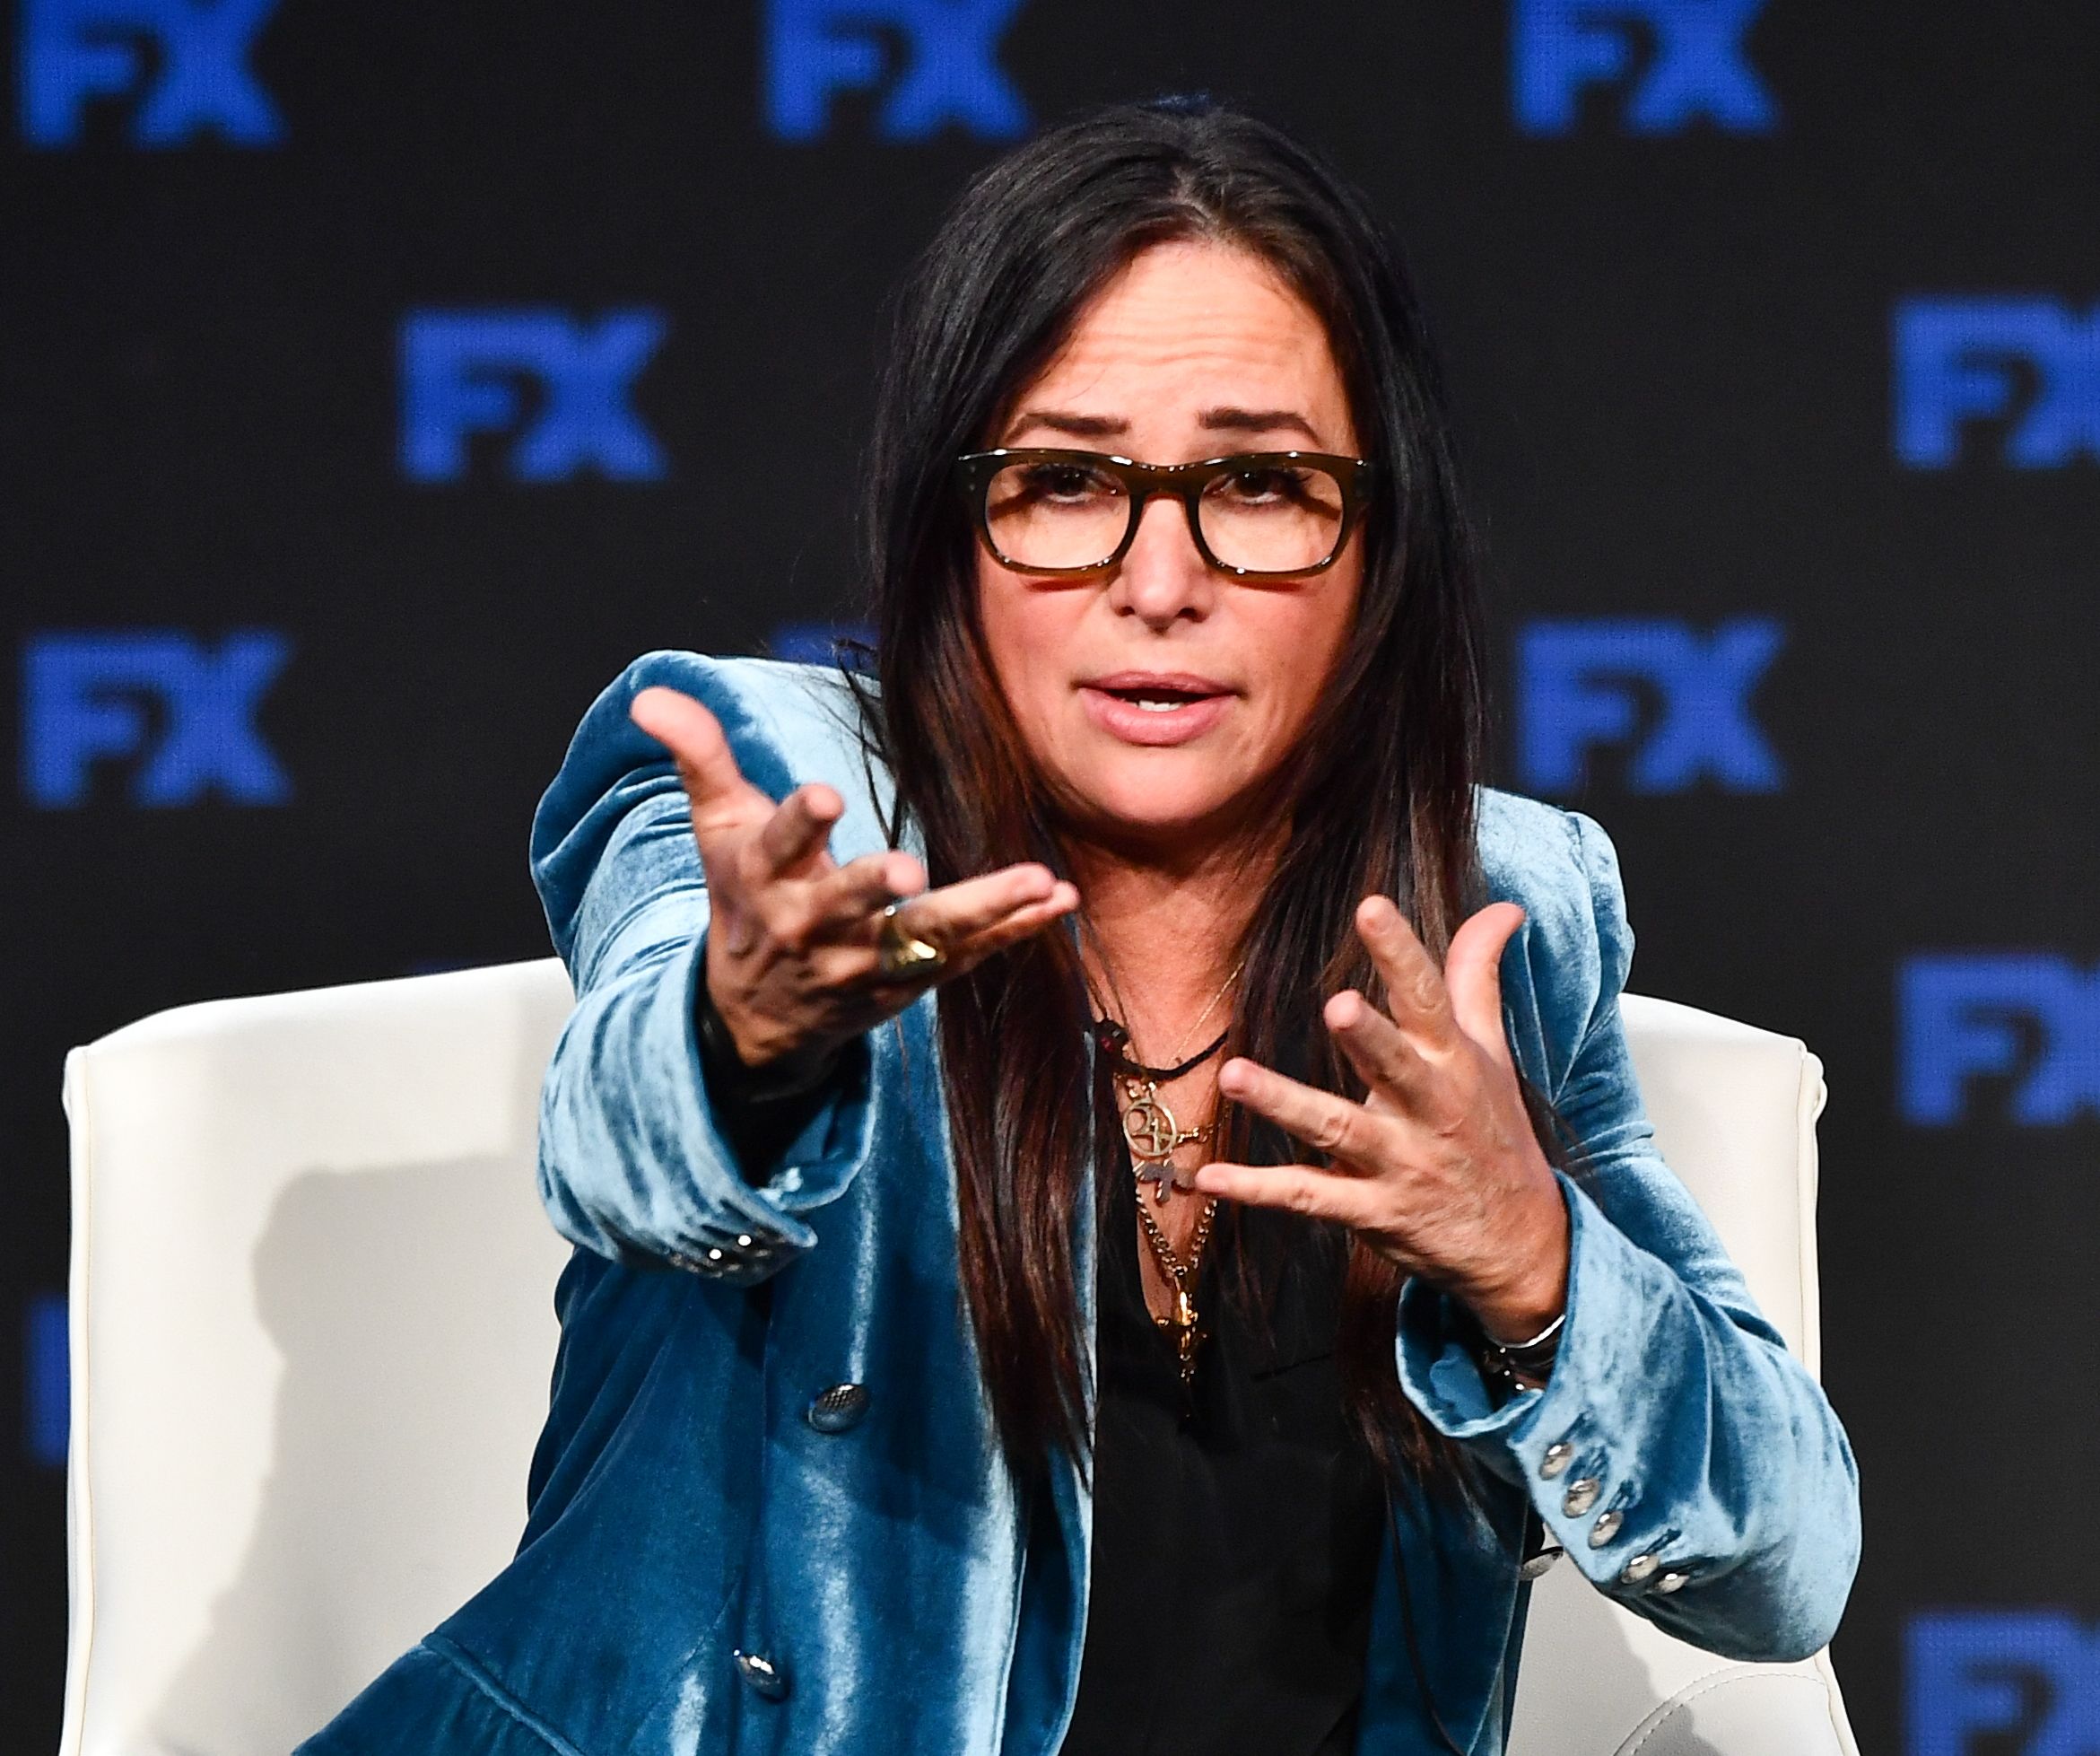 Pamela Adlon on Using the C-Word in ‘Better Things’ Season 4: ‘It’s About Who’s Saying It’ - variety.com